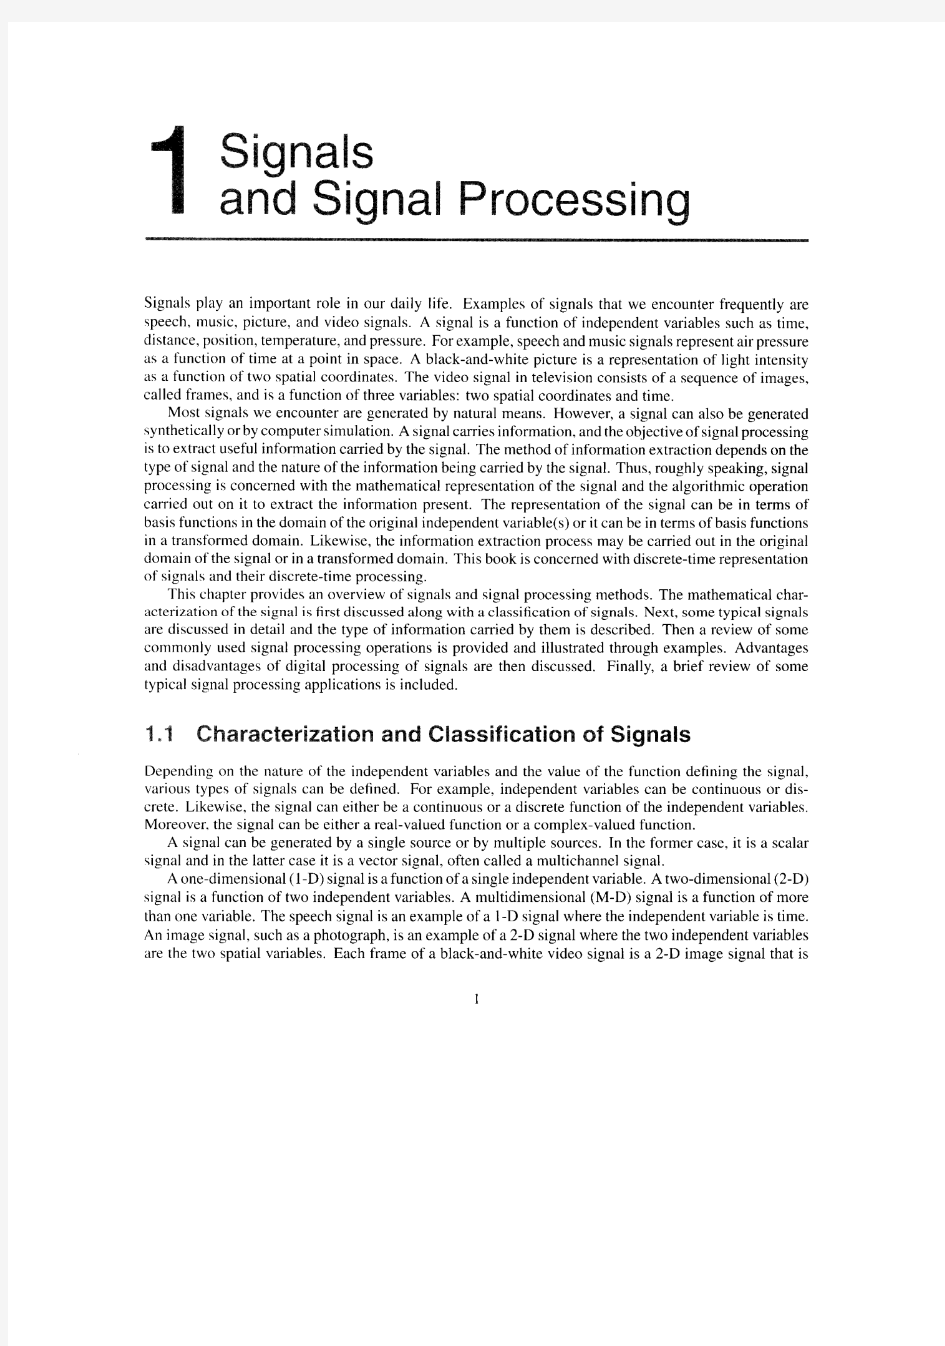 Digital Signal Processing-A Computer Based Approach(2nd) Chapter 1